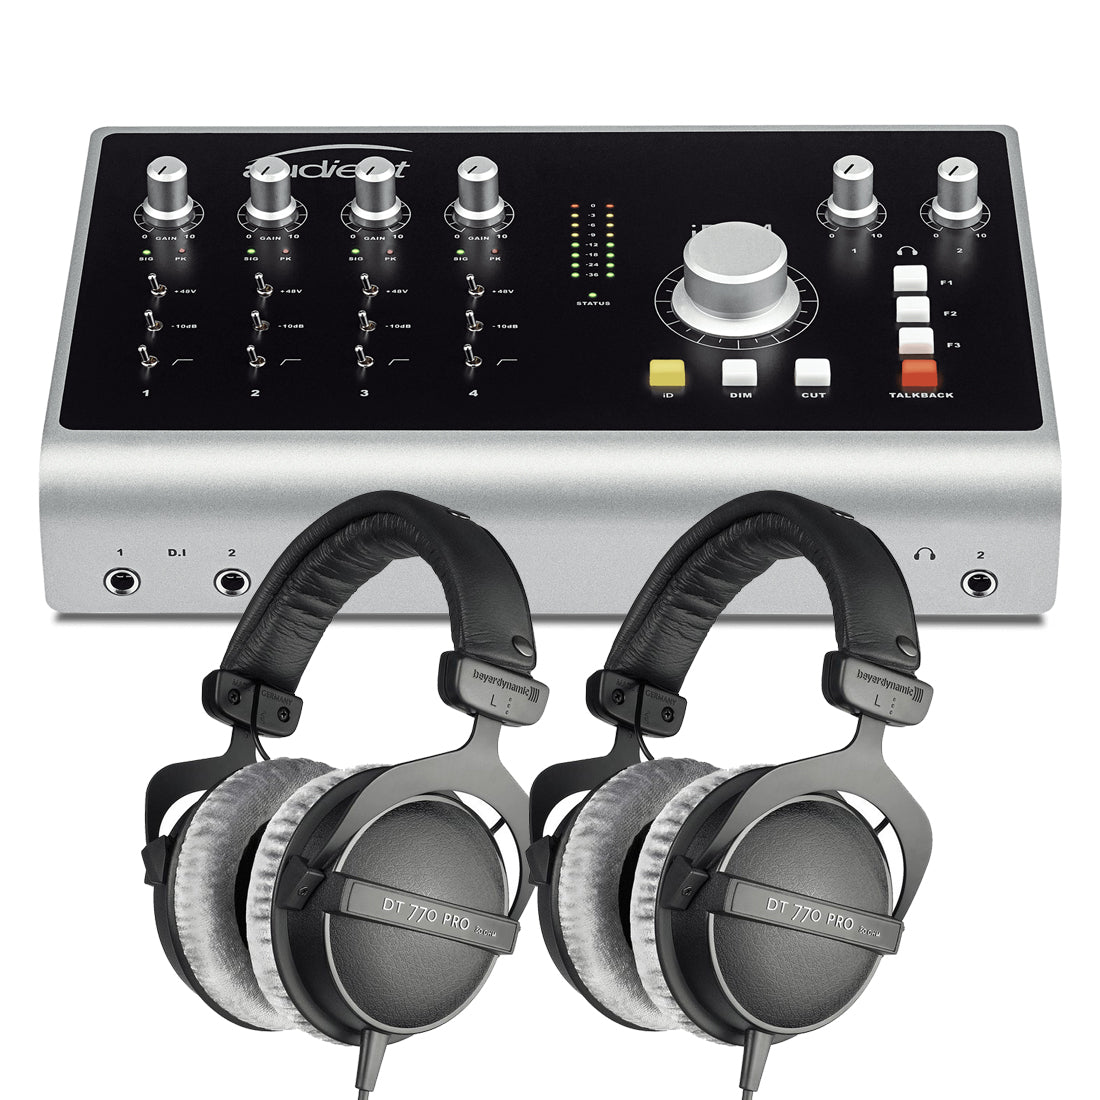 Audient iD44 USB-C 20in | 24out Audio Interface Bundle 1